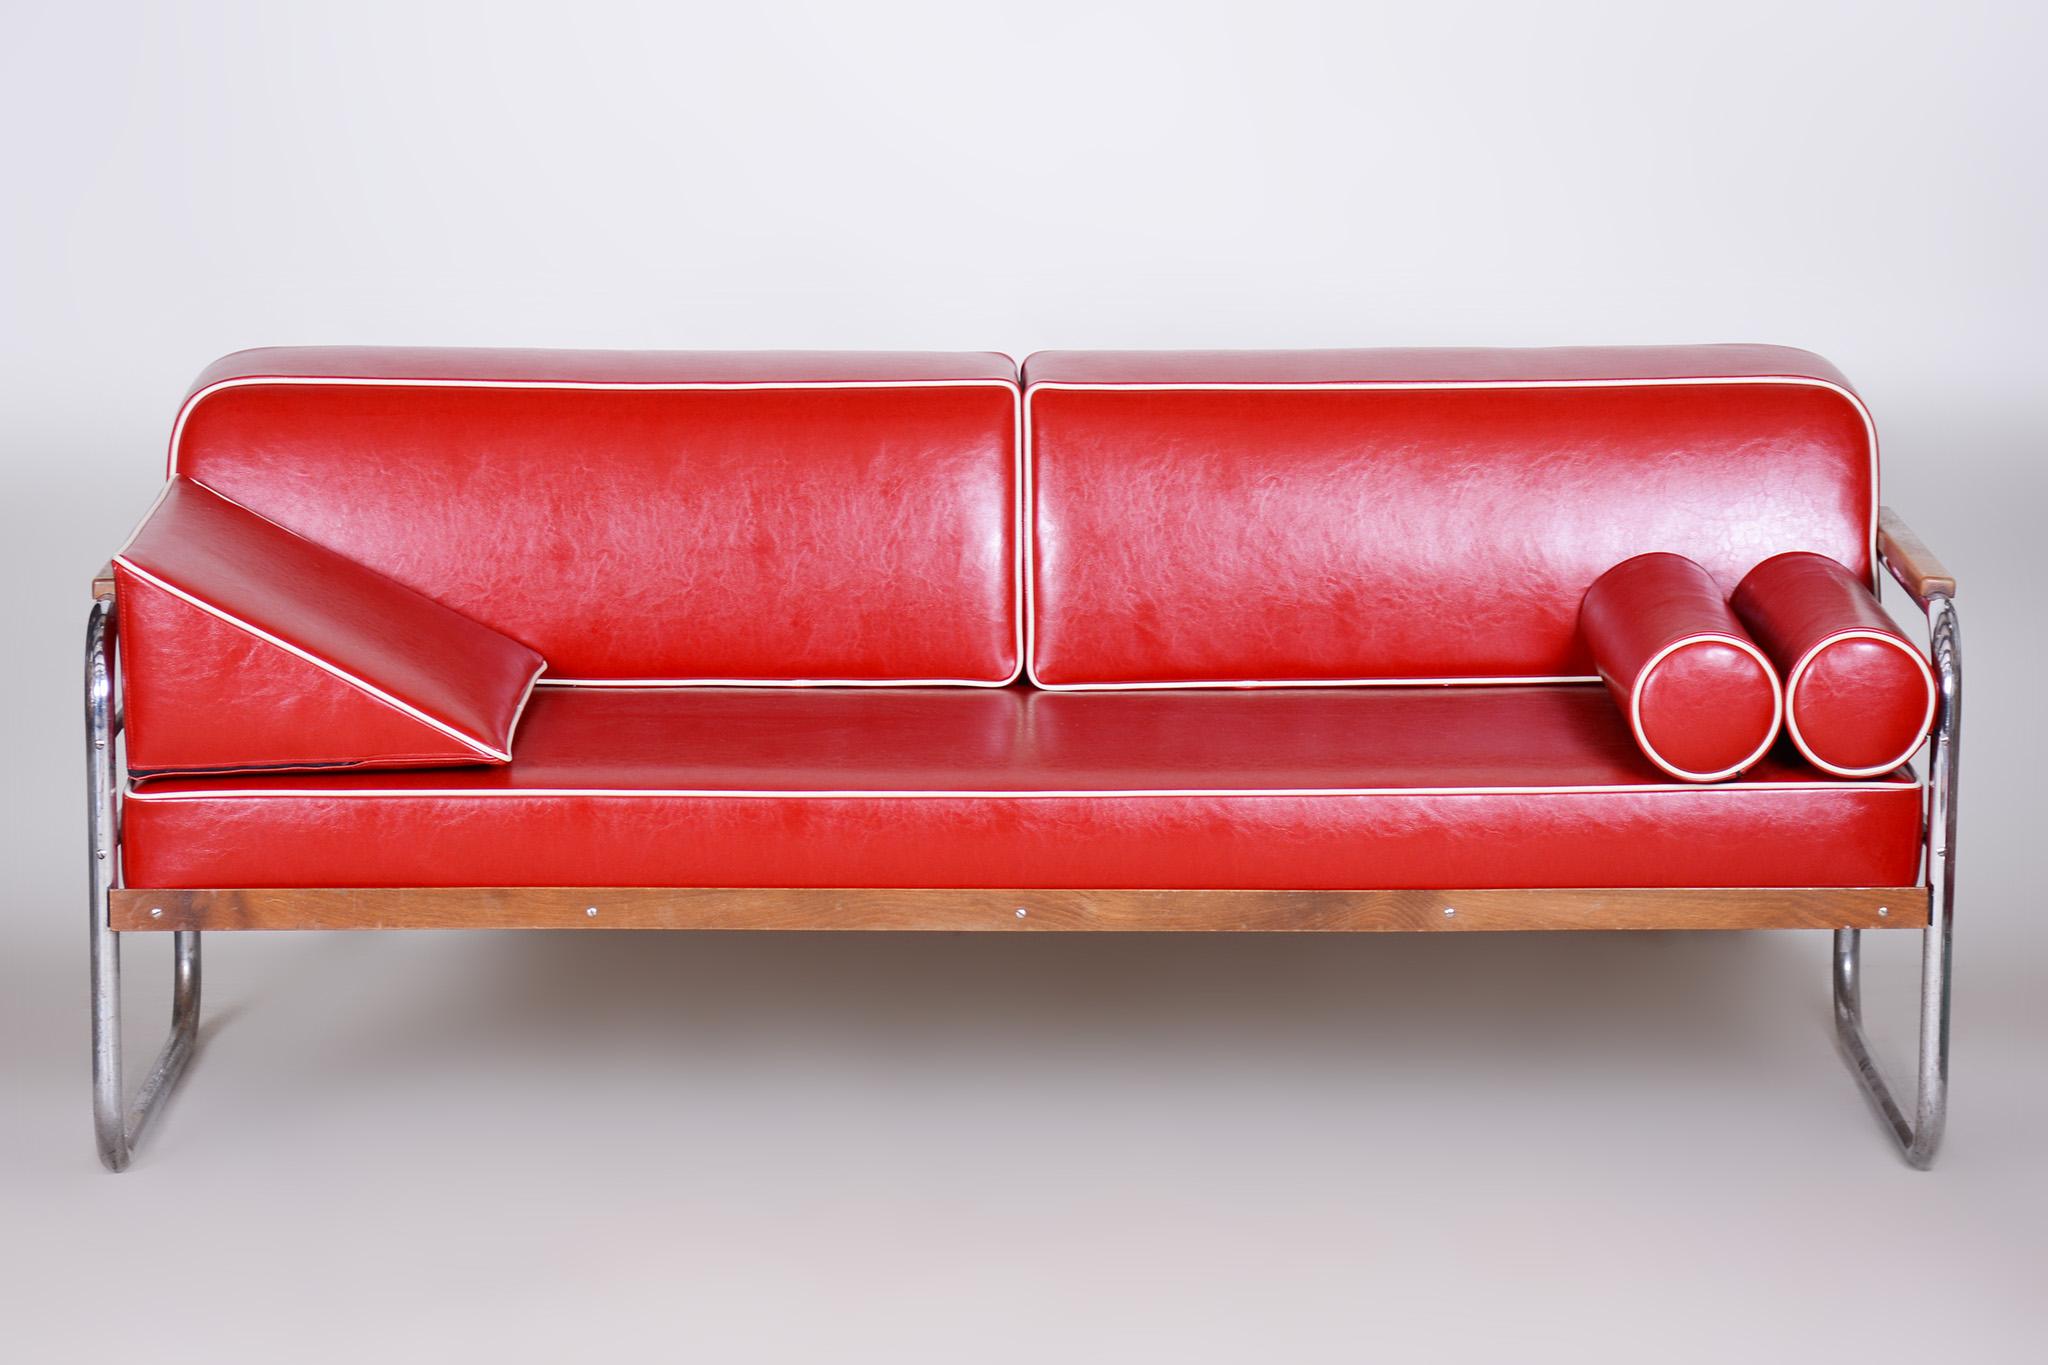 Red High-Quality Leather Bauhaus Sofa by Thonet, Chrome, Fully Restored, 1930s In Good Condition For Sale In Horomerice, CZ